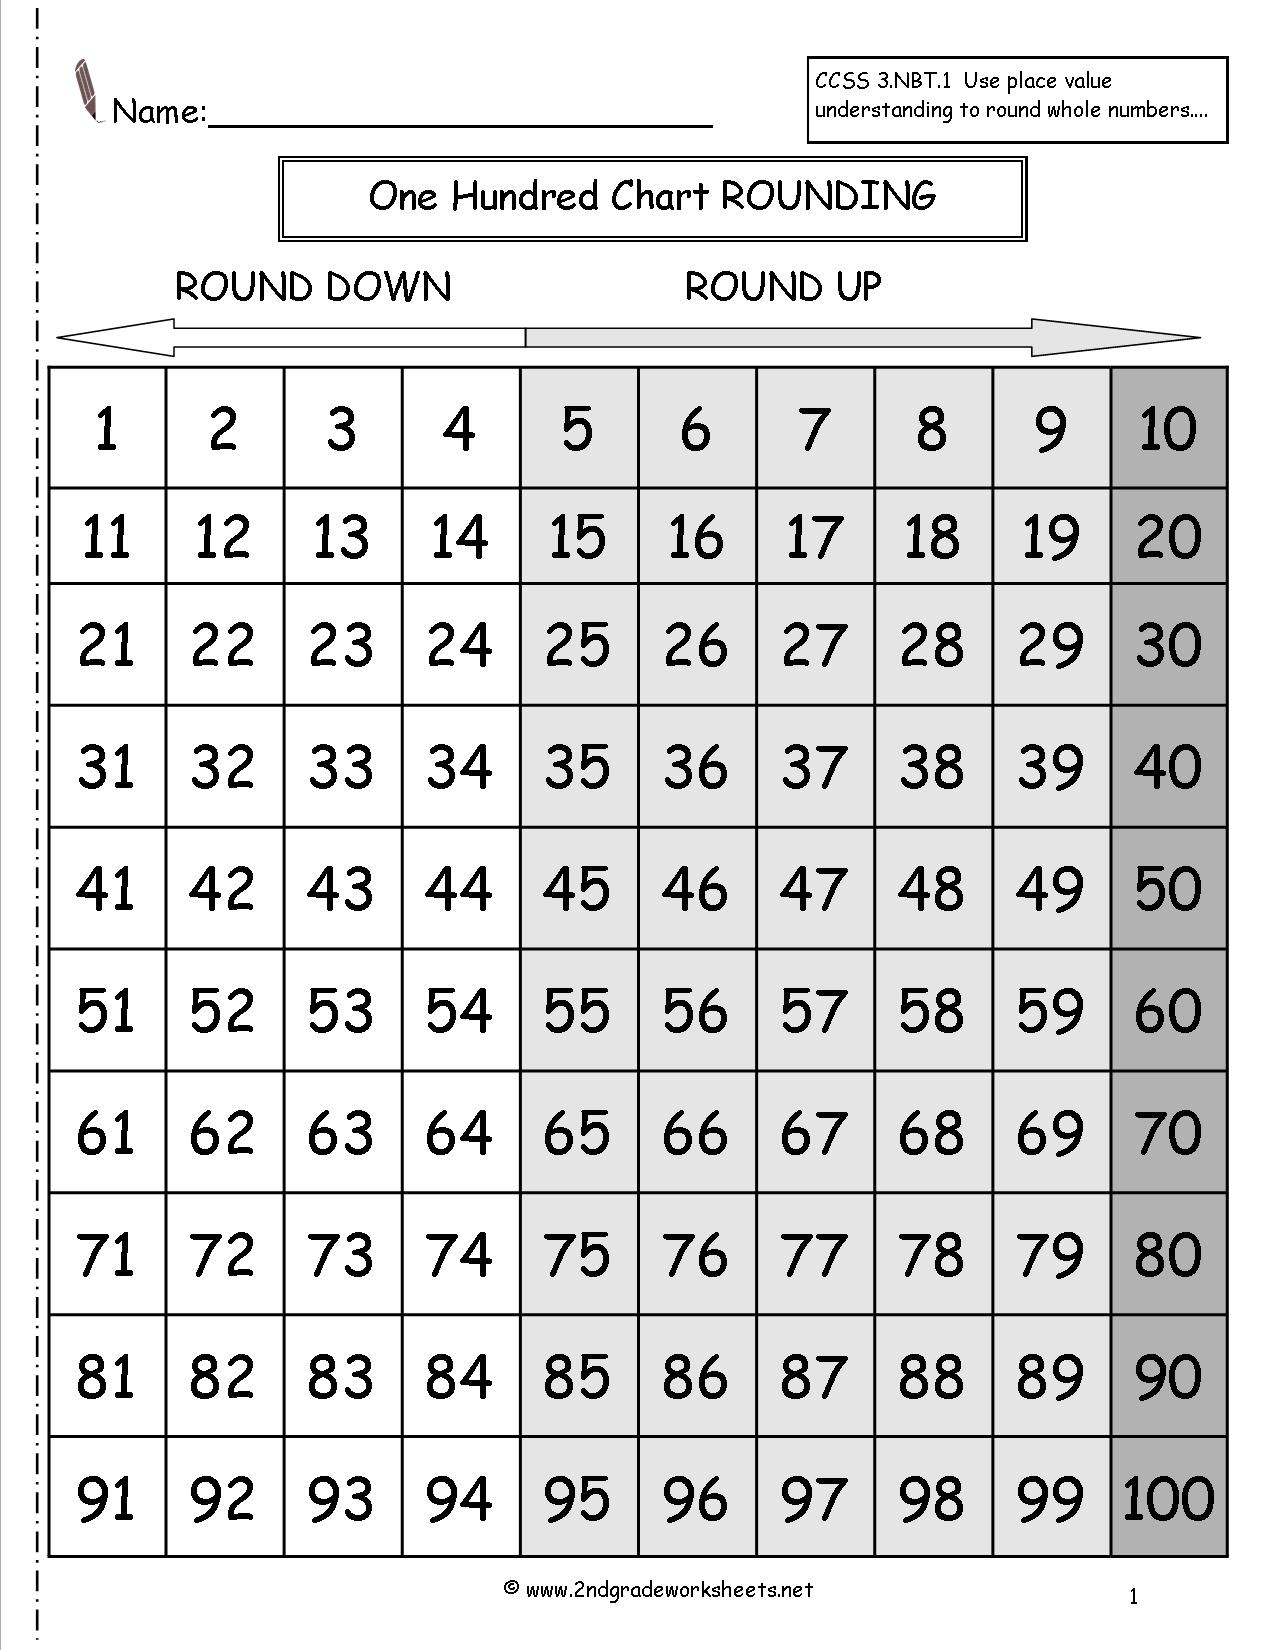 Rounding Numbers Tens Ones Hundreds Charts Image